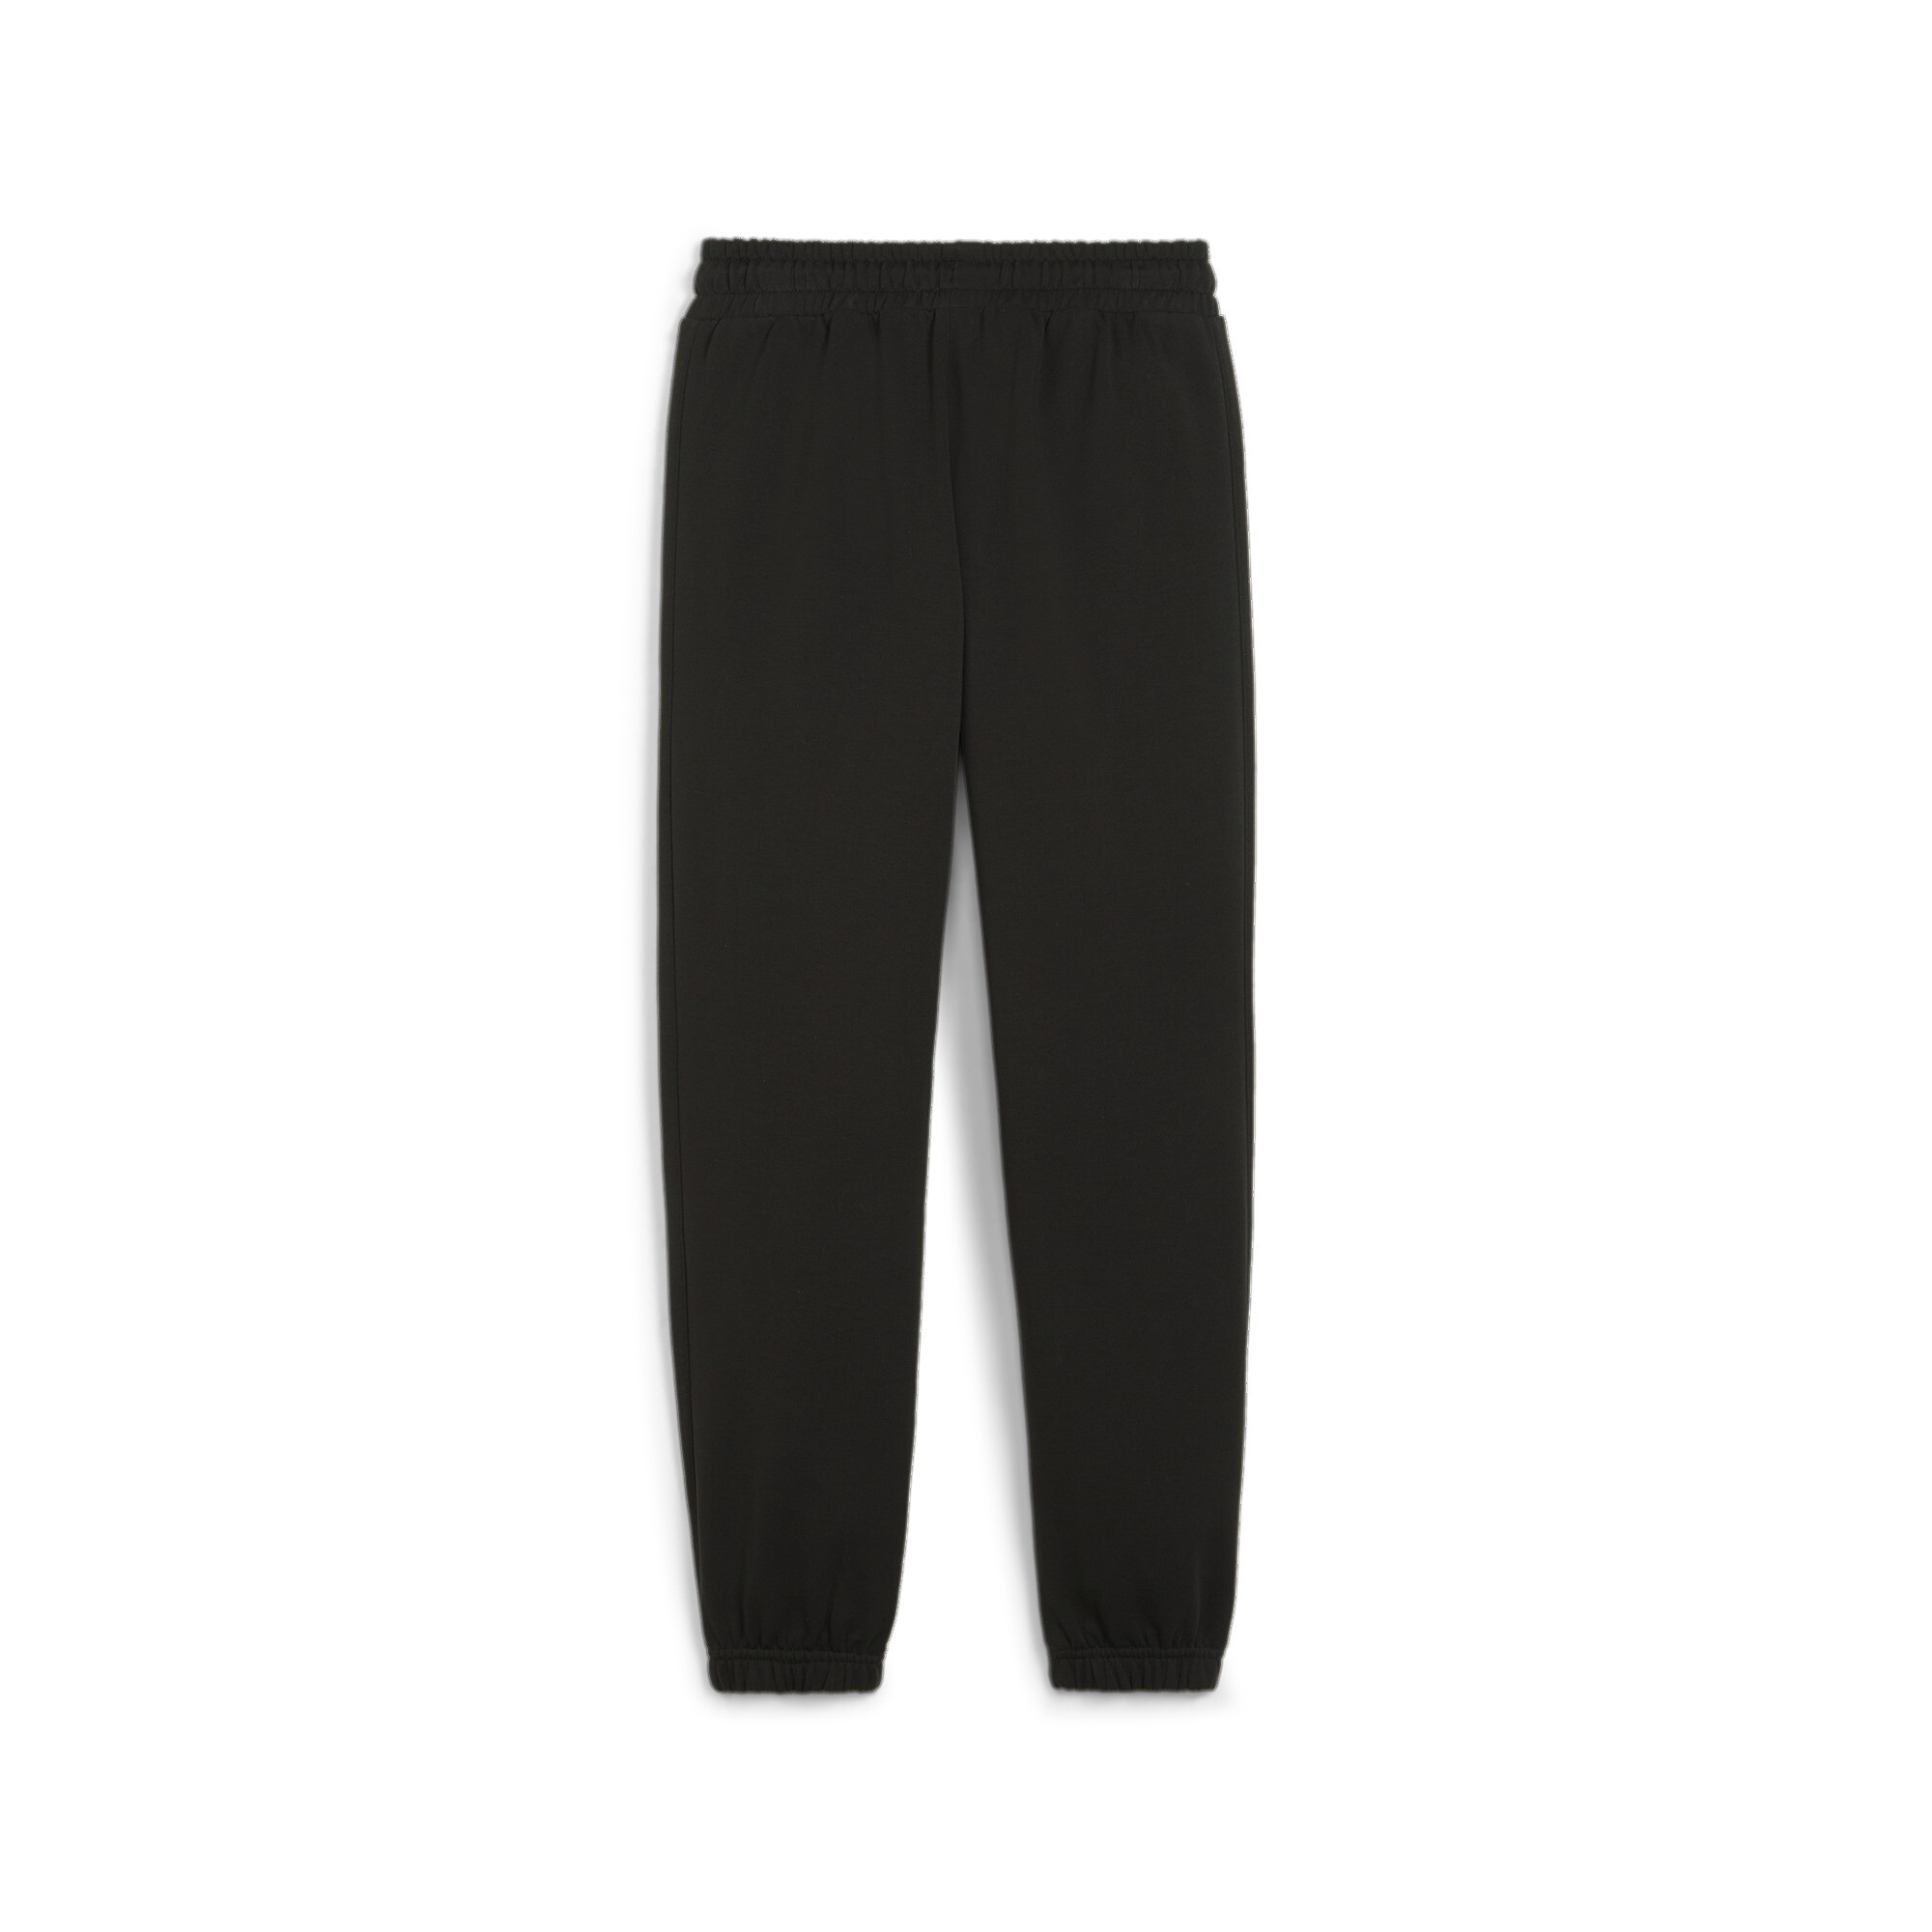 PUMA FOR THE FANBASE Sweatpants In Black, Size 13-14 Youth